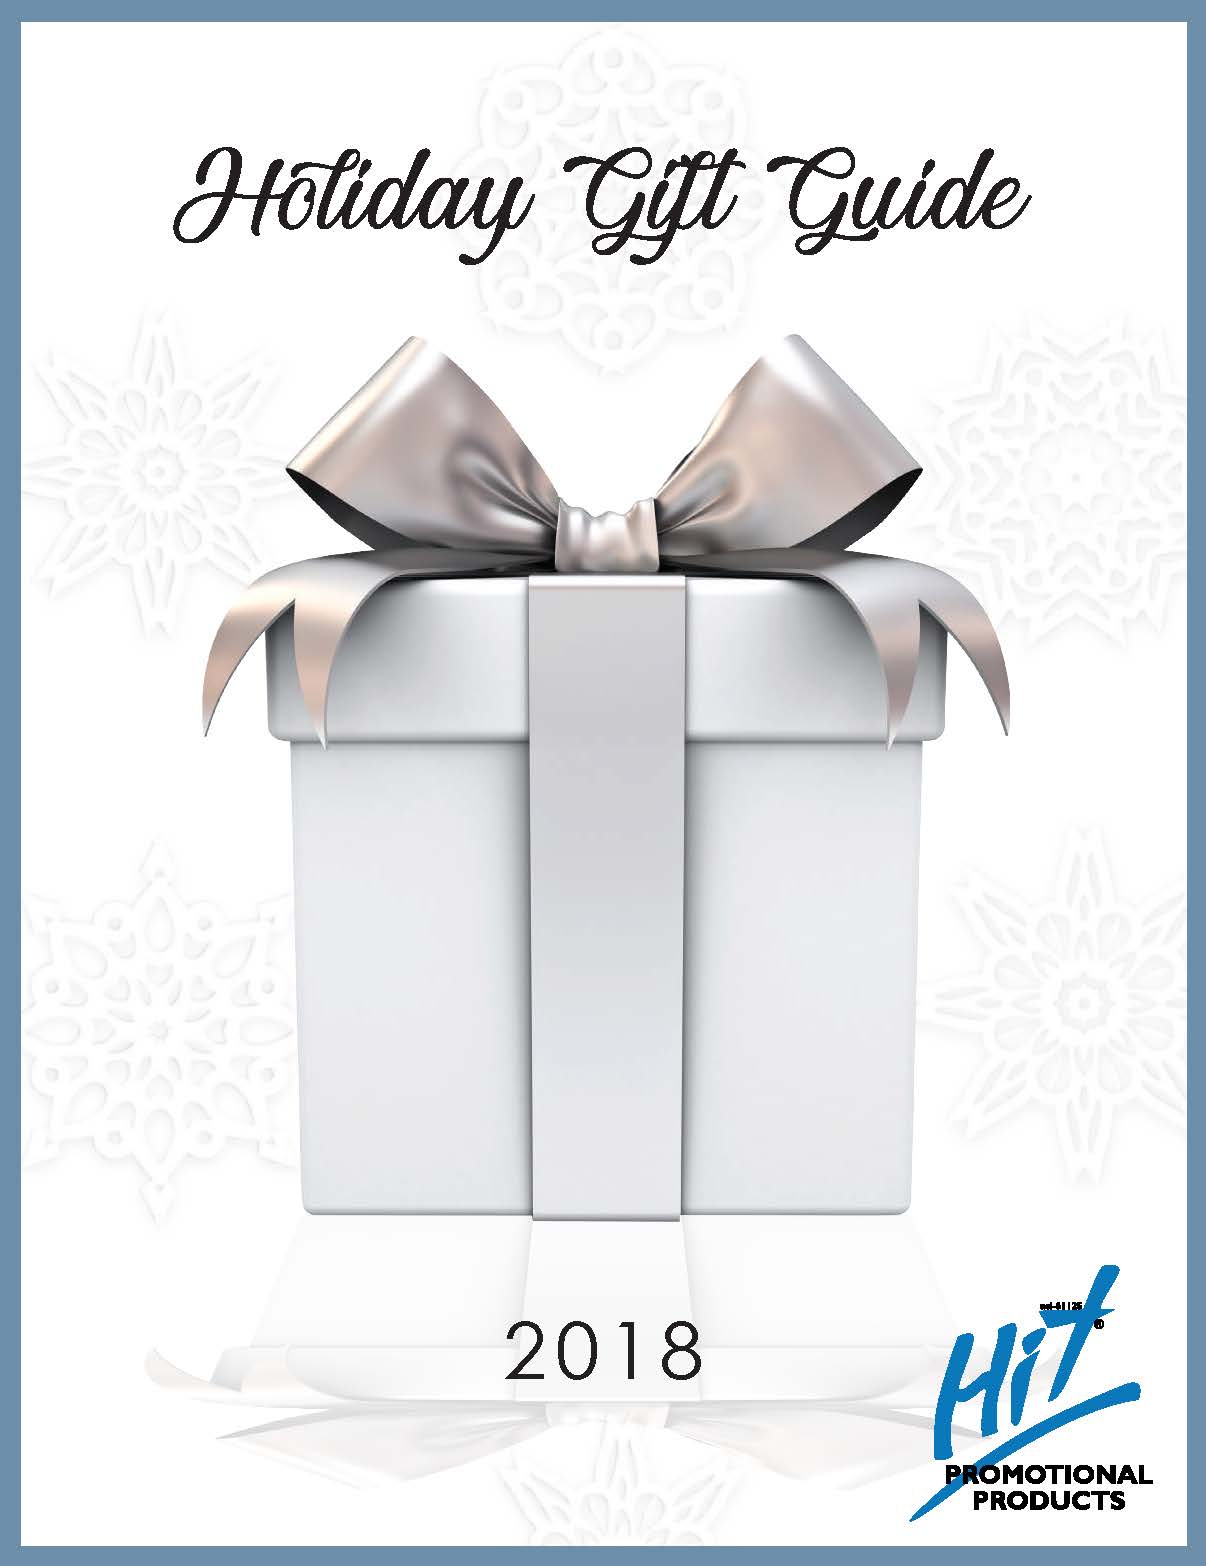 Holiday Gift Guide 2018_Page_01.jpg